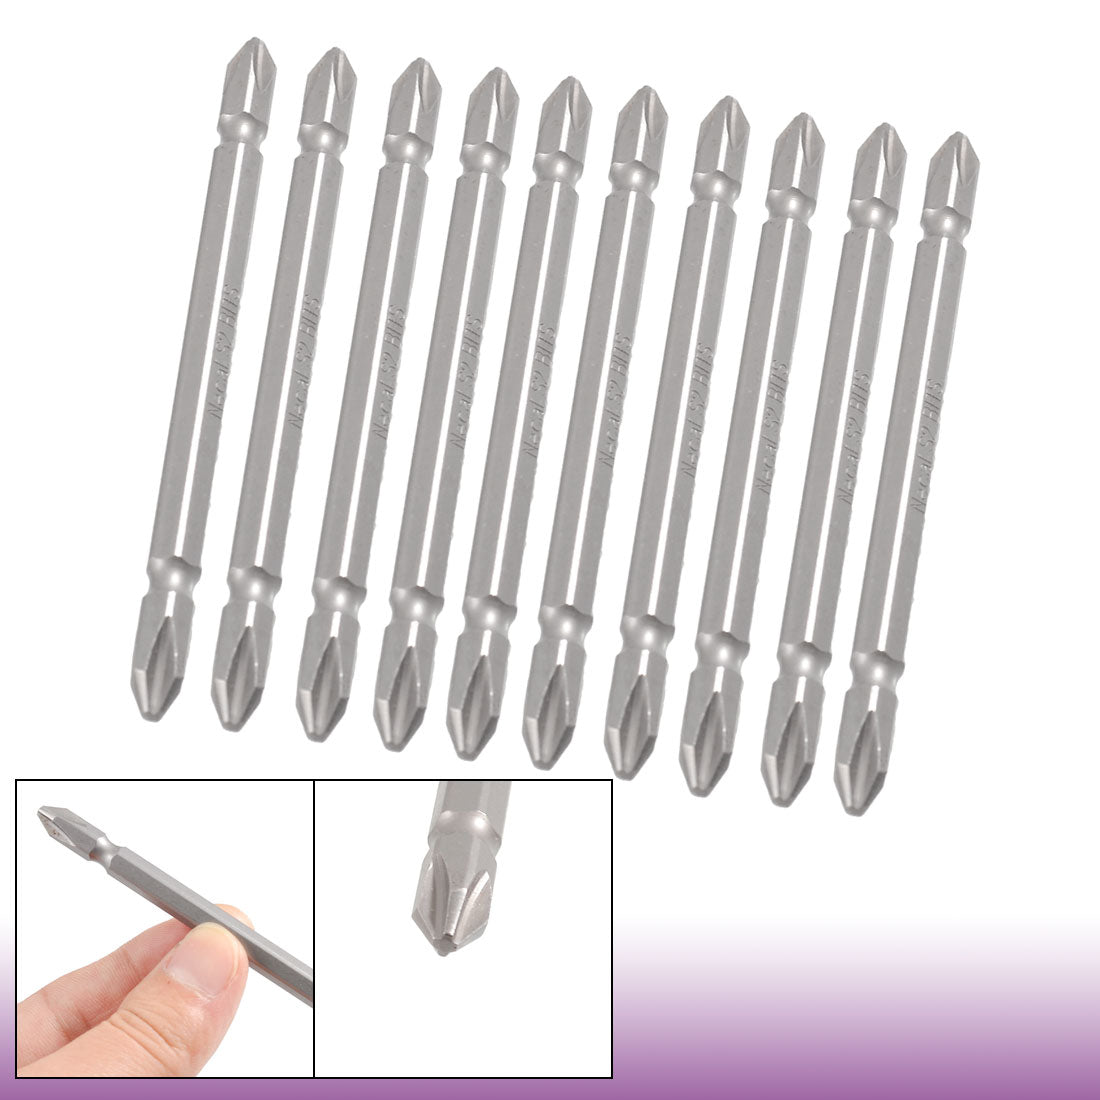 uxcell Uxcell 10 Pcs 1/4" Hex Shank 100mm Long 6mm Double End PH2 Phillips Screwdriver Bits